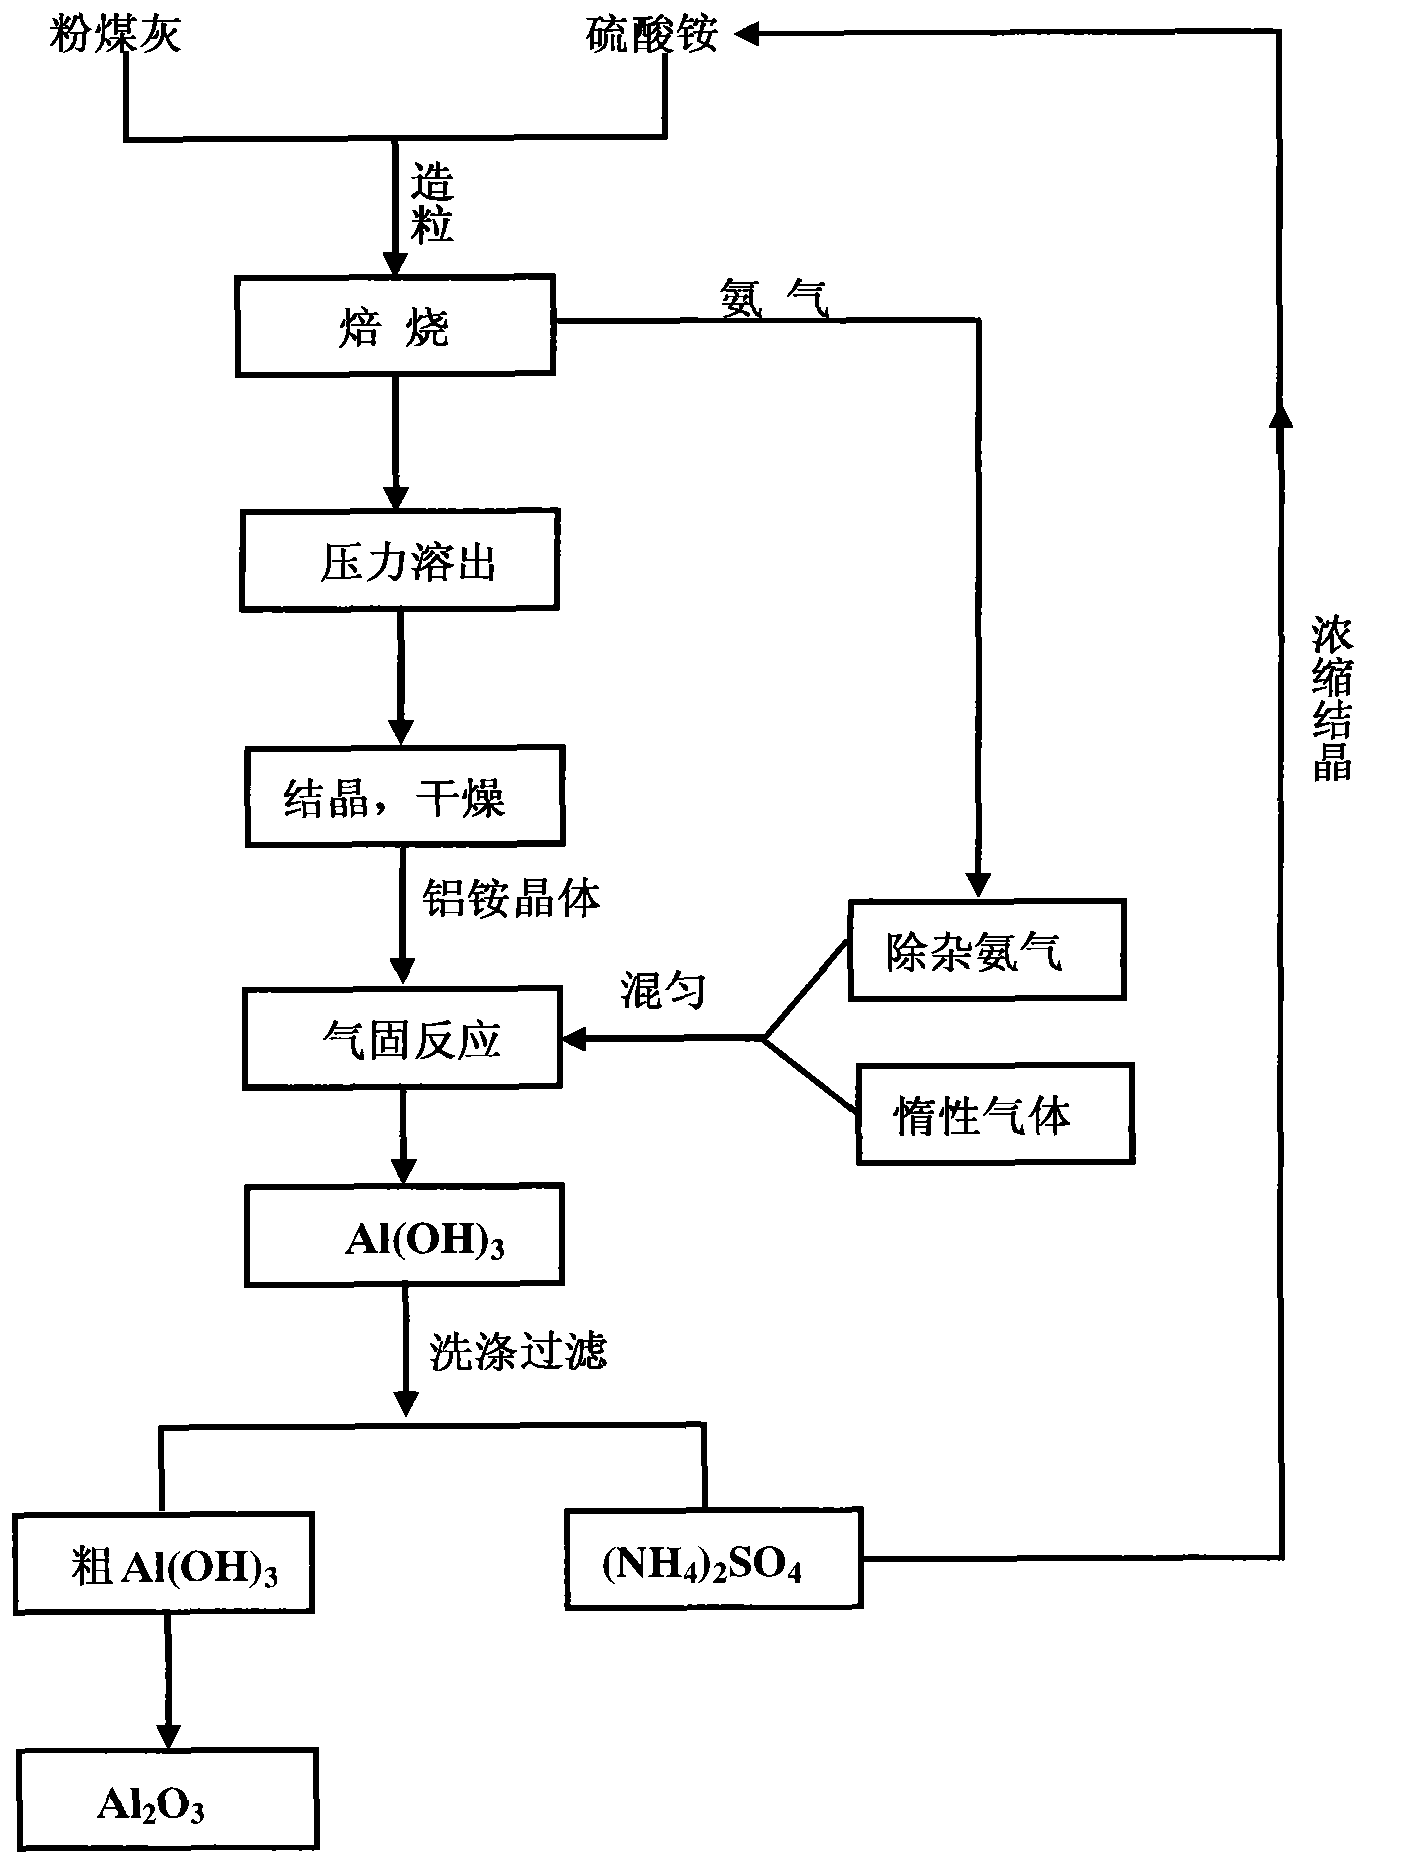 Method for preparation of aluminum hydroxide by gas-solid technique